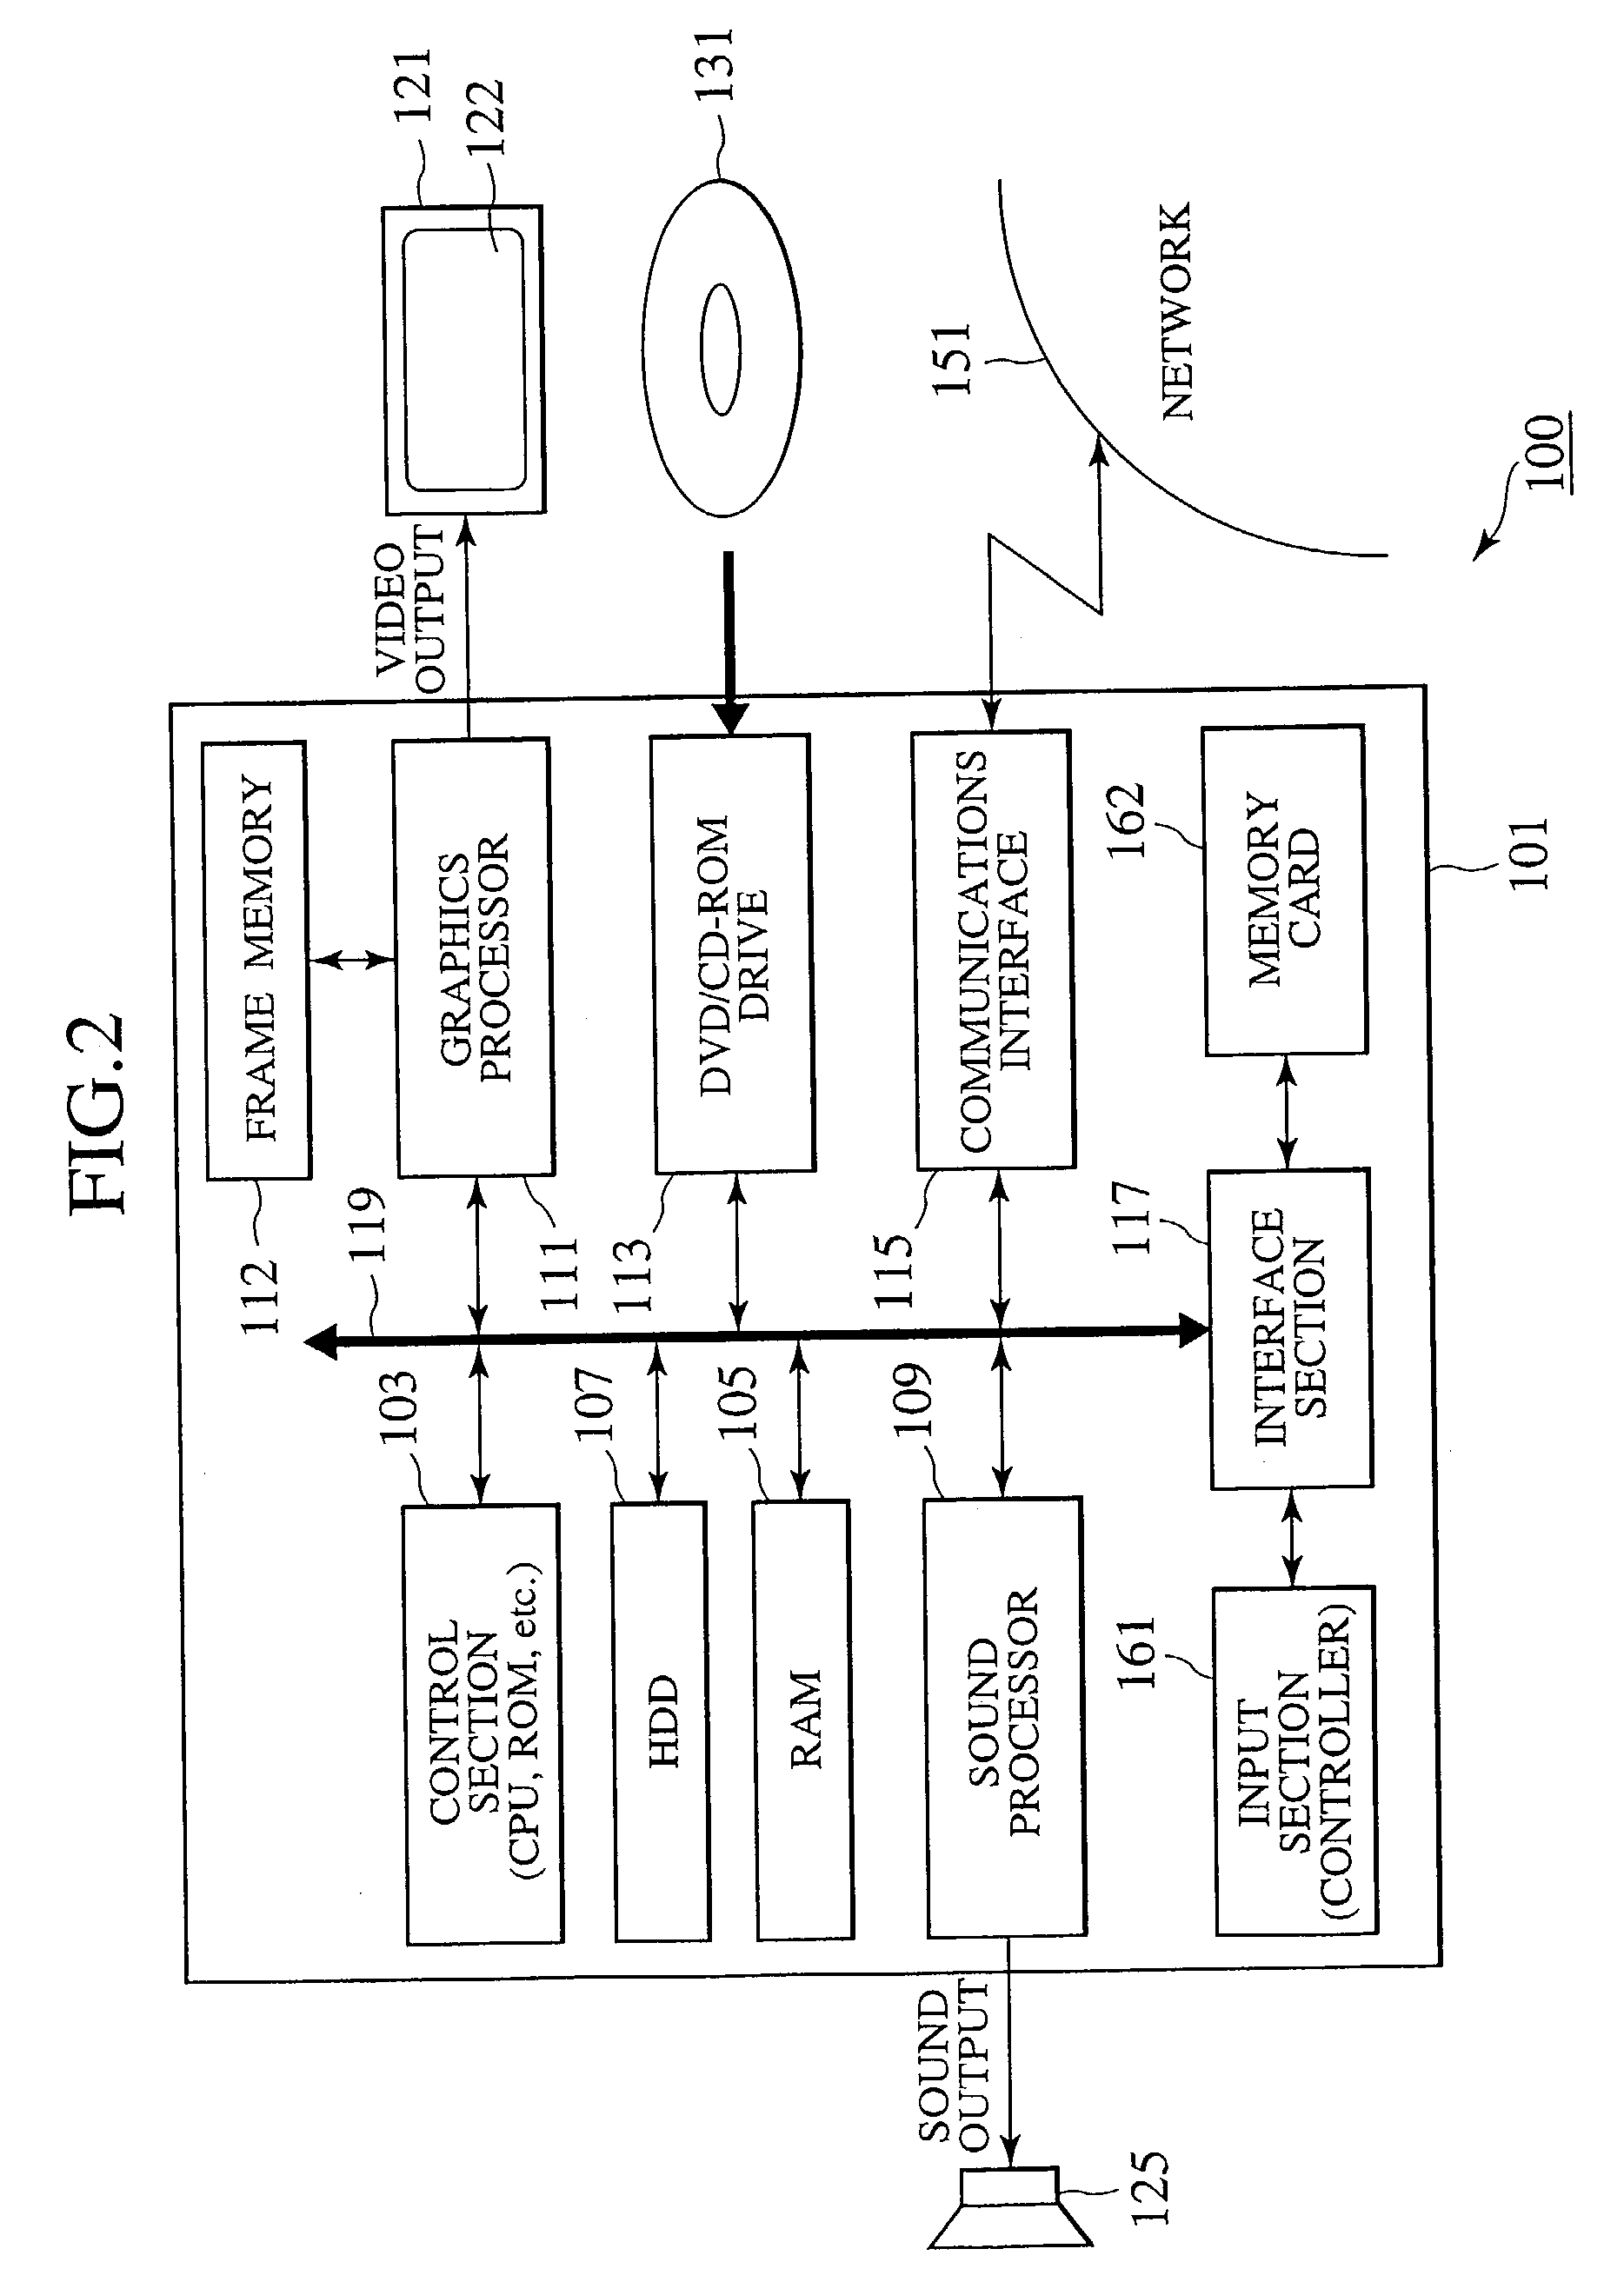 Method for controlling display of messages transmitted/received in network game